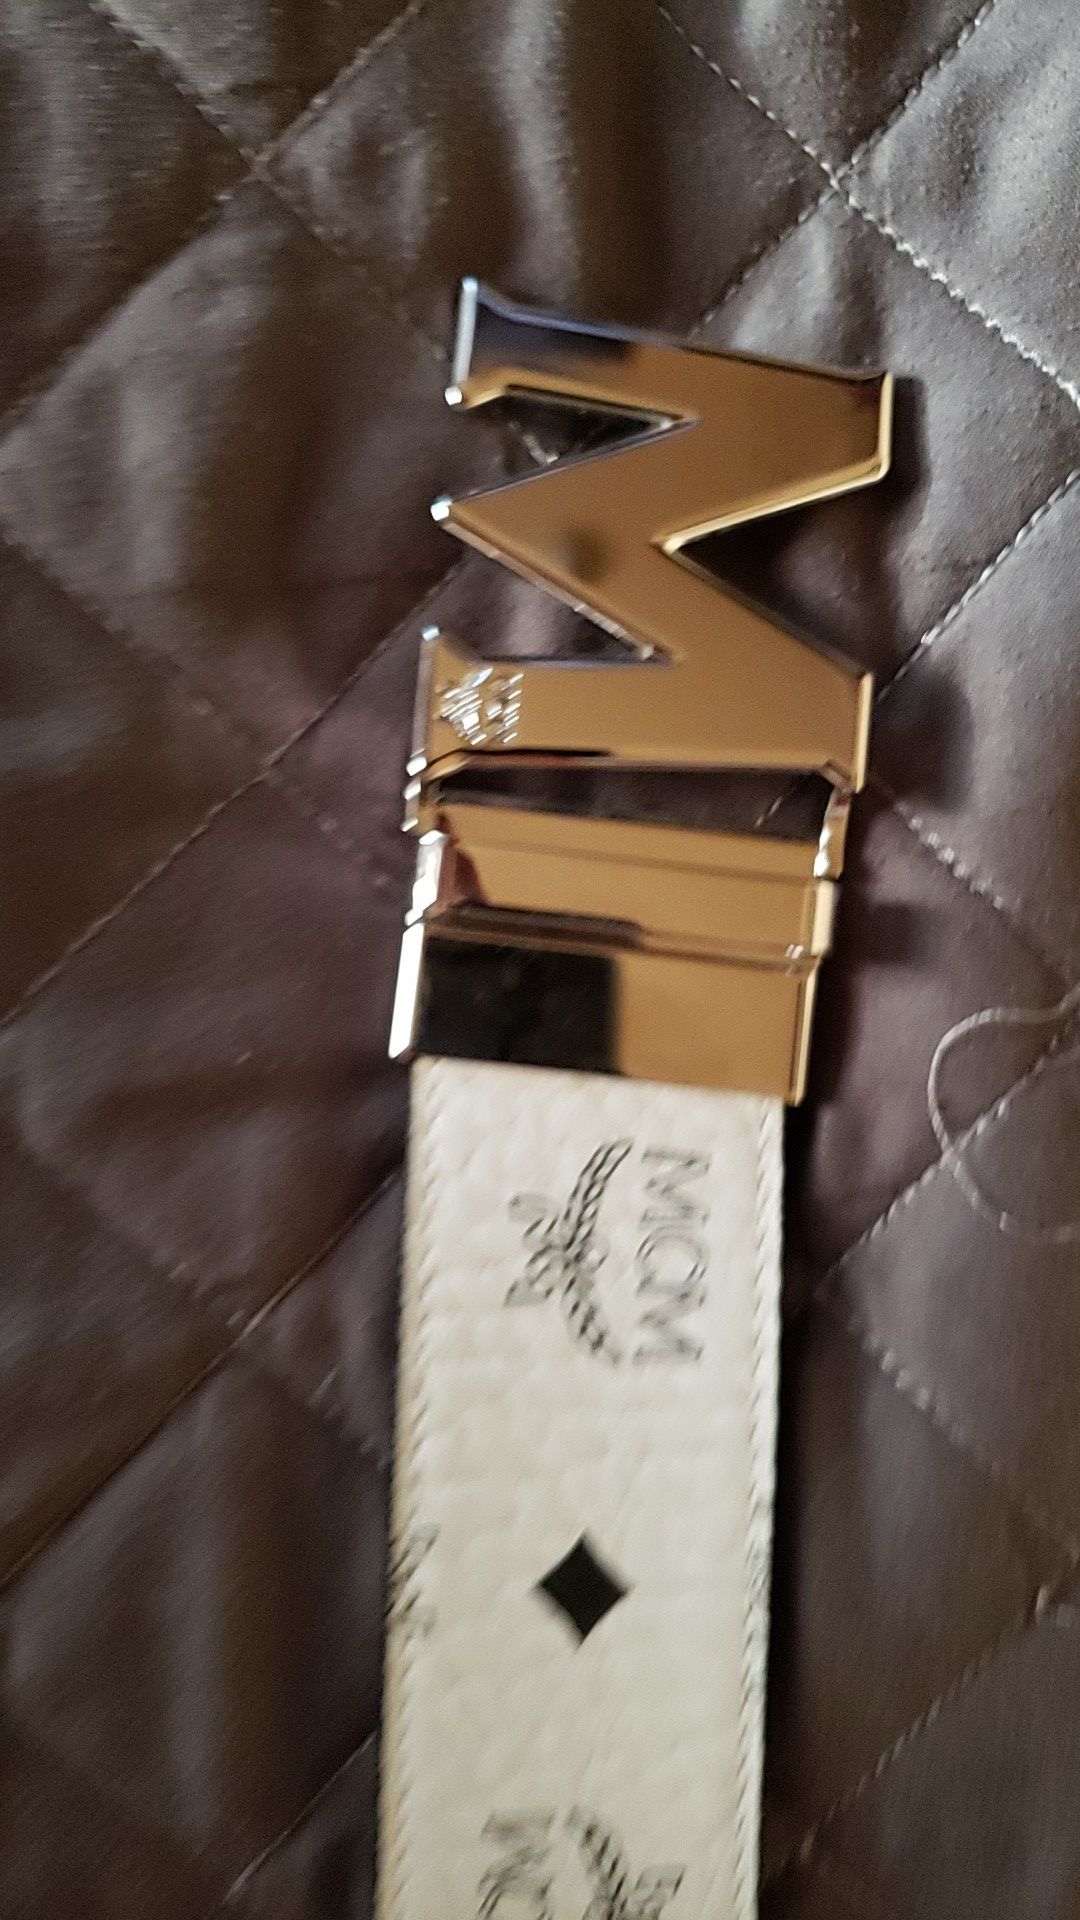 Authentic MCM Blue/Blk Reversible Belt for Sale in Queens, NY - OfferUp